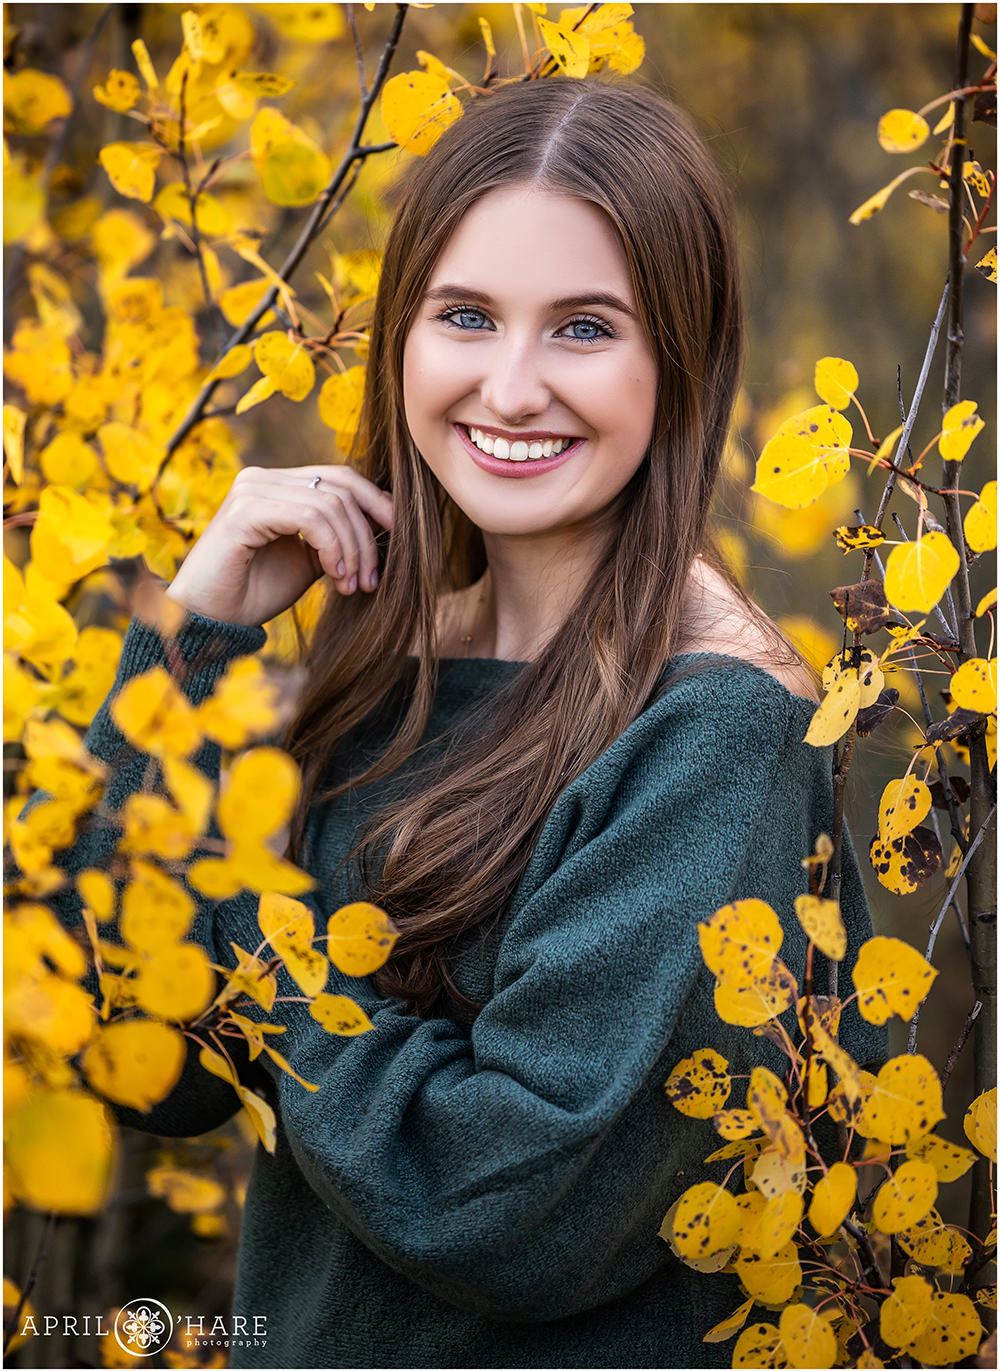 Beautiful high school senior yearbook headshot portrait in the pretty yellow aspen leaves during fall